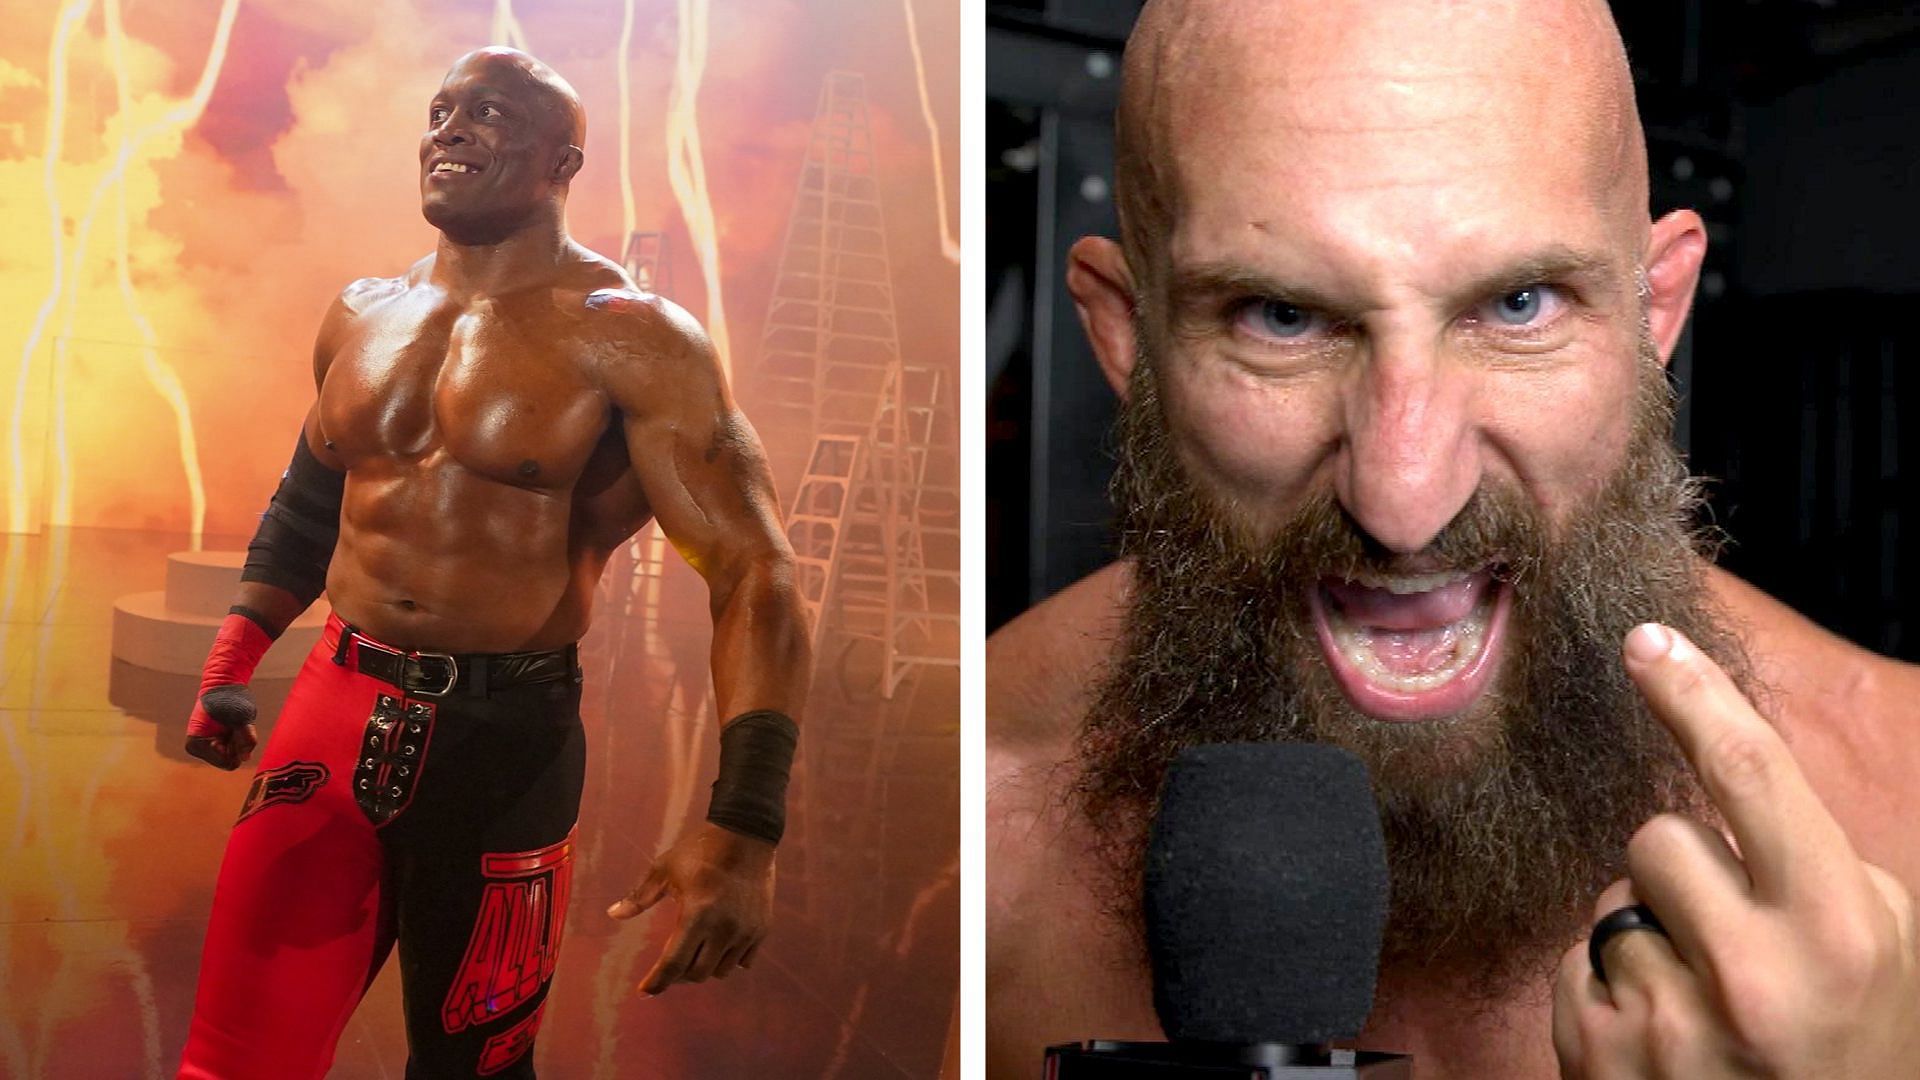 Bobby Lashley and Ciampa will collide on WWE RAW